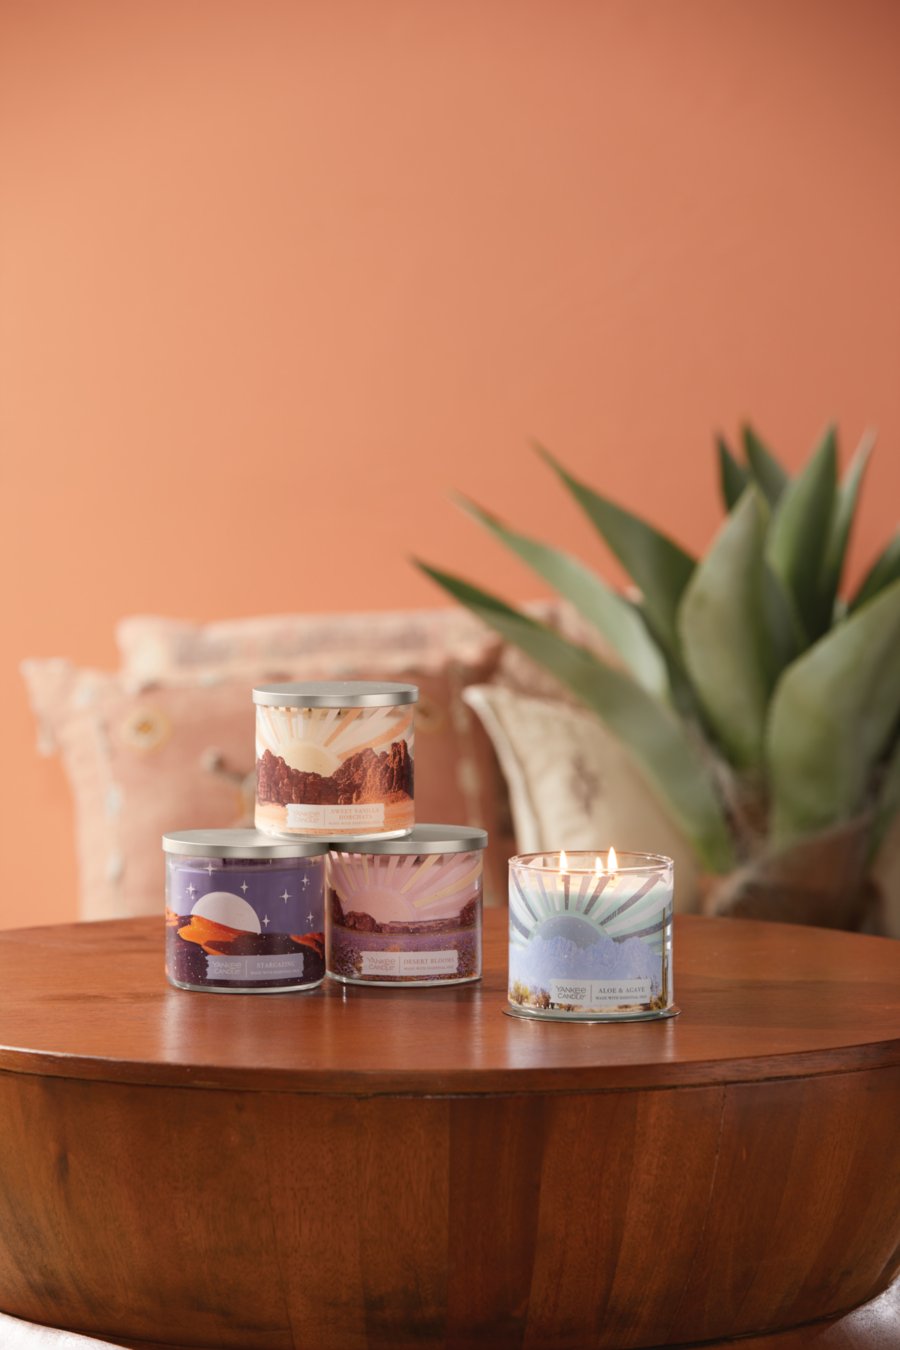 the under the desert sun collection featuring a stargazing 3-Wick candle, a sweet vanilla horchata 3-Wick candle, a desert blooms 3-Wick candle, and an aloe & agave 3-Wick candle on a wood table